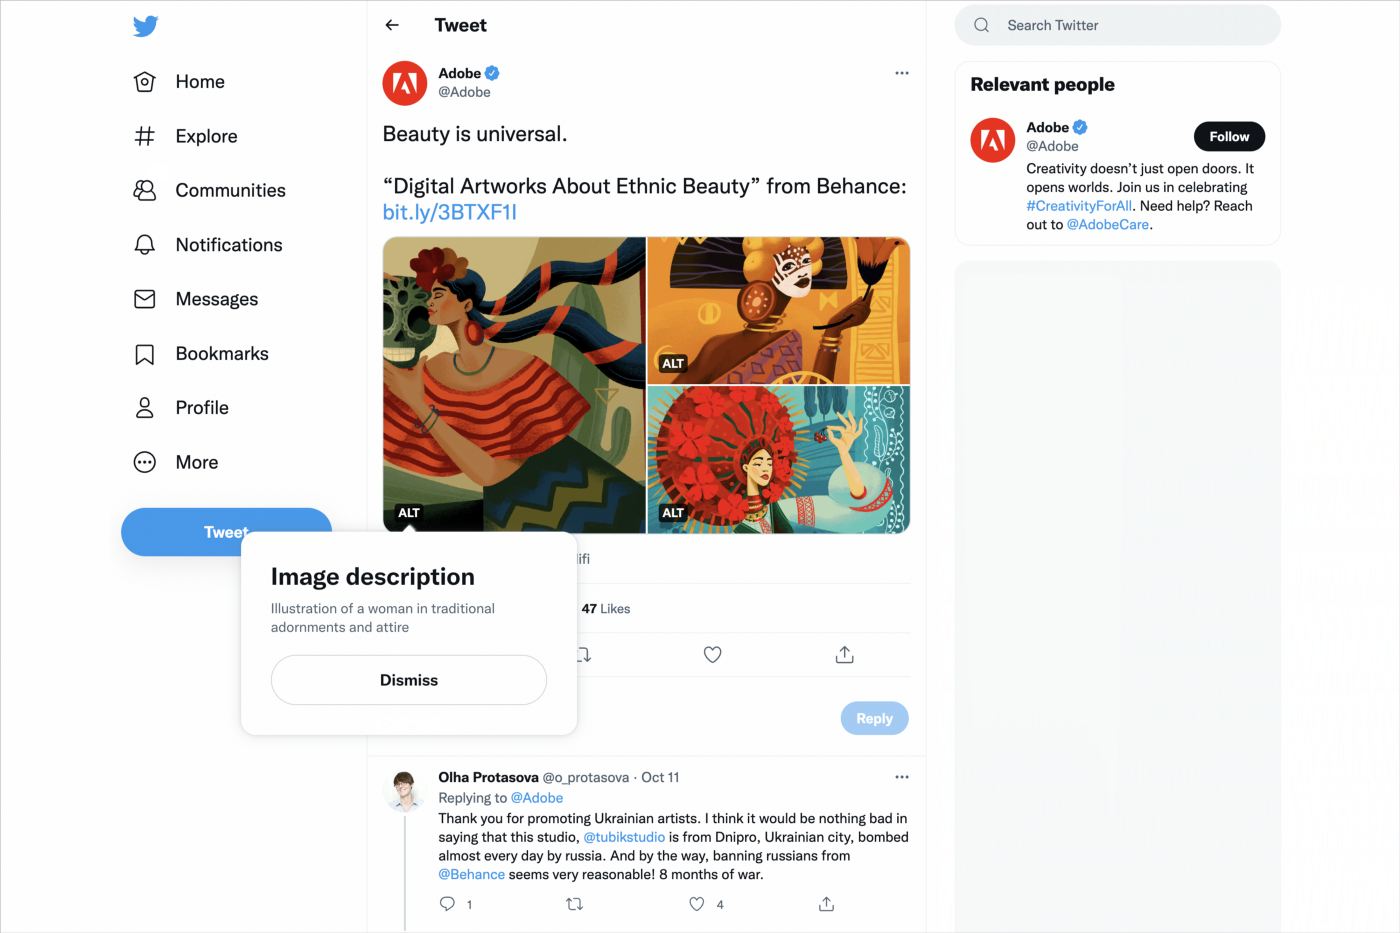 Adobe’s tweet with three images of women in traditional attires and the same generic image descriptions for all three pictures: example 1.